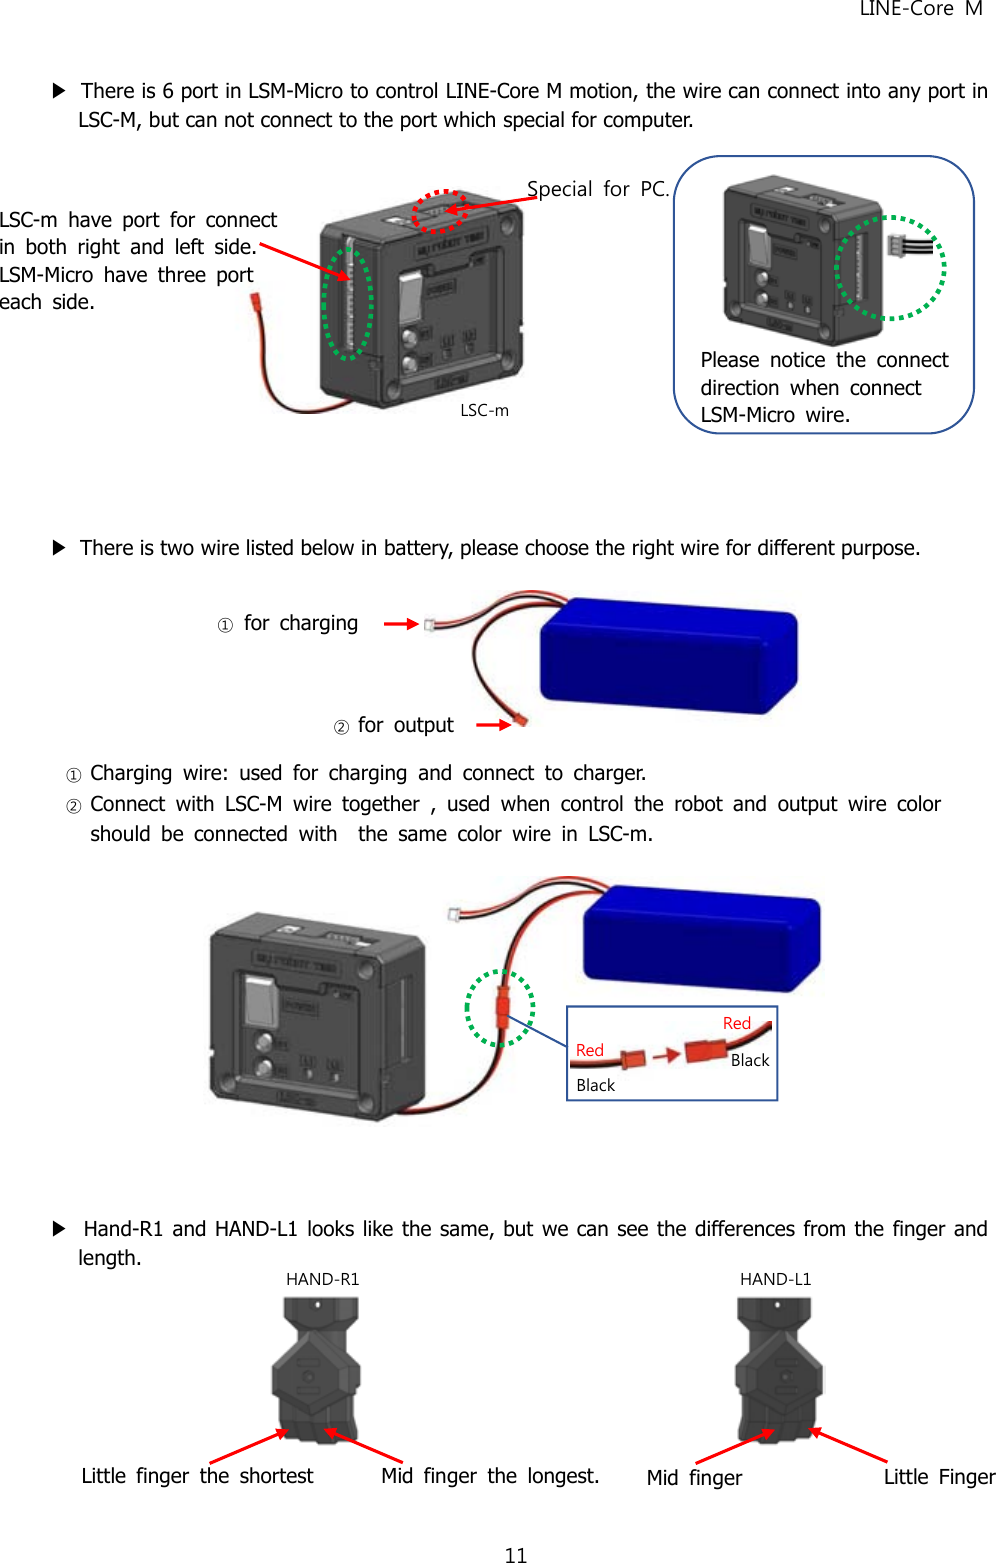 LINE-Core M11▶There is 6 port in LSM-Micro to control LINE-Core M motion, the wire can connect into any port inLSC-M, but can not connect to the port which special for computer.▶There is two wire listed below in battery, please choose the right wire for different purpose.①Charging wire: used for charging and connect to charger.②Connect with LSC-M wire together , used when control the robot and output wire colorshould be connected with the same color wire in LSC-m.▶Hand-R1 and HAND-L1 looks like the same, but we can see the differences from the finger andlength.HAND-R1HAND-L1Little finger the shortestMid finger the longest.Mid fingerLittle FingerRedBlackRedBlack①for charging②for outputSpecial for PC.LSC-m have port for connectin both right and left side.LSM-Micro have three porteach side.LSC-mPlease notice the connectdirection when connectLSM-Micro wire.